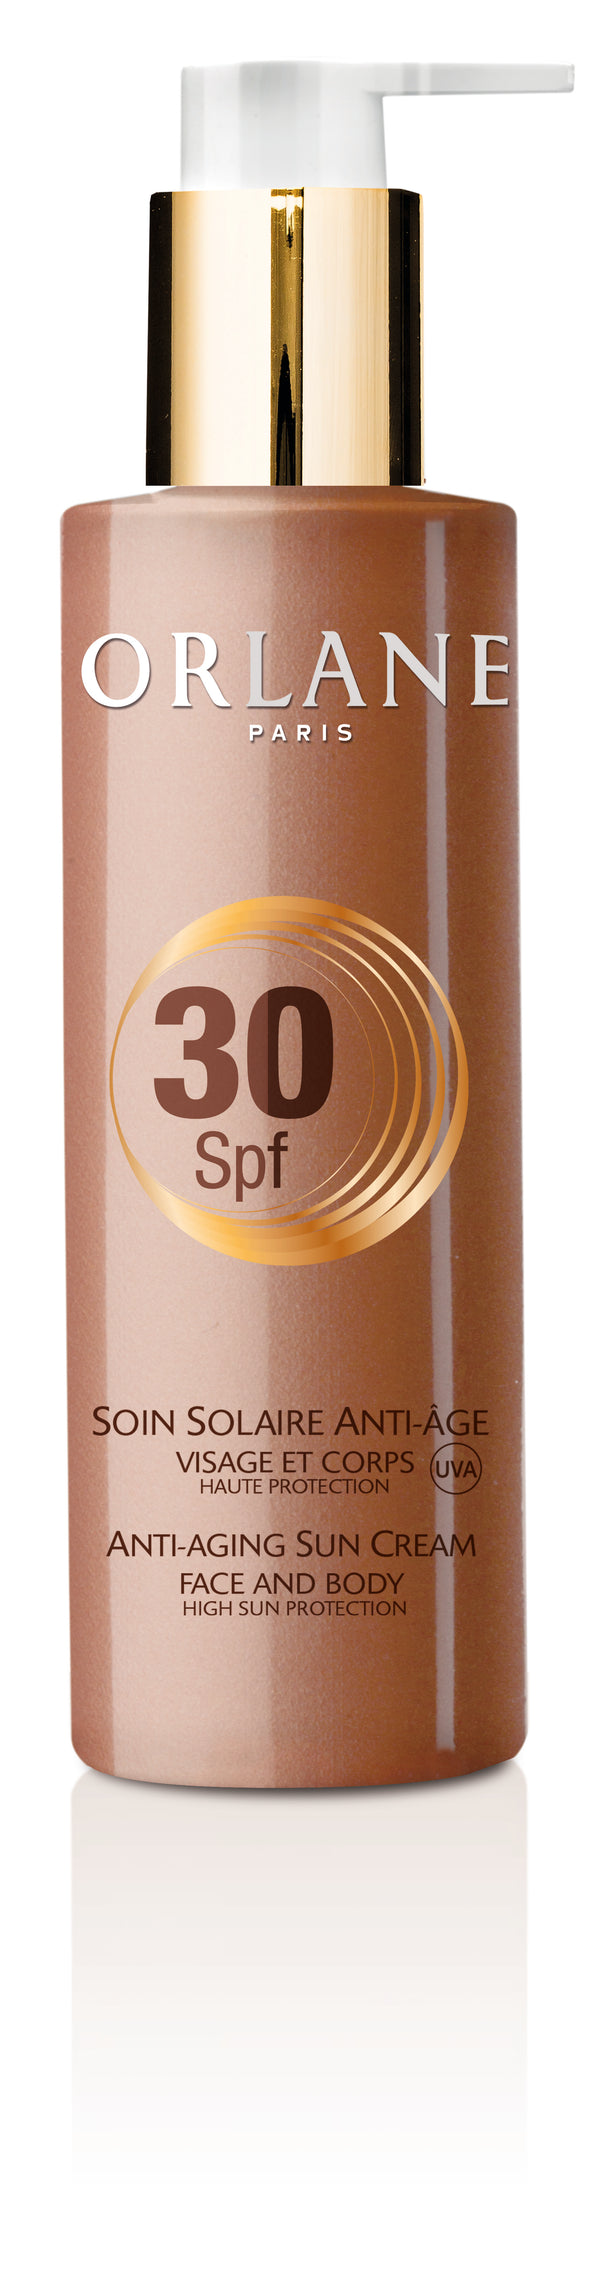 Orlane Soin Solaire Protection Anti-Age Visage et Corps SPF 30